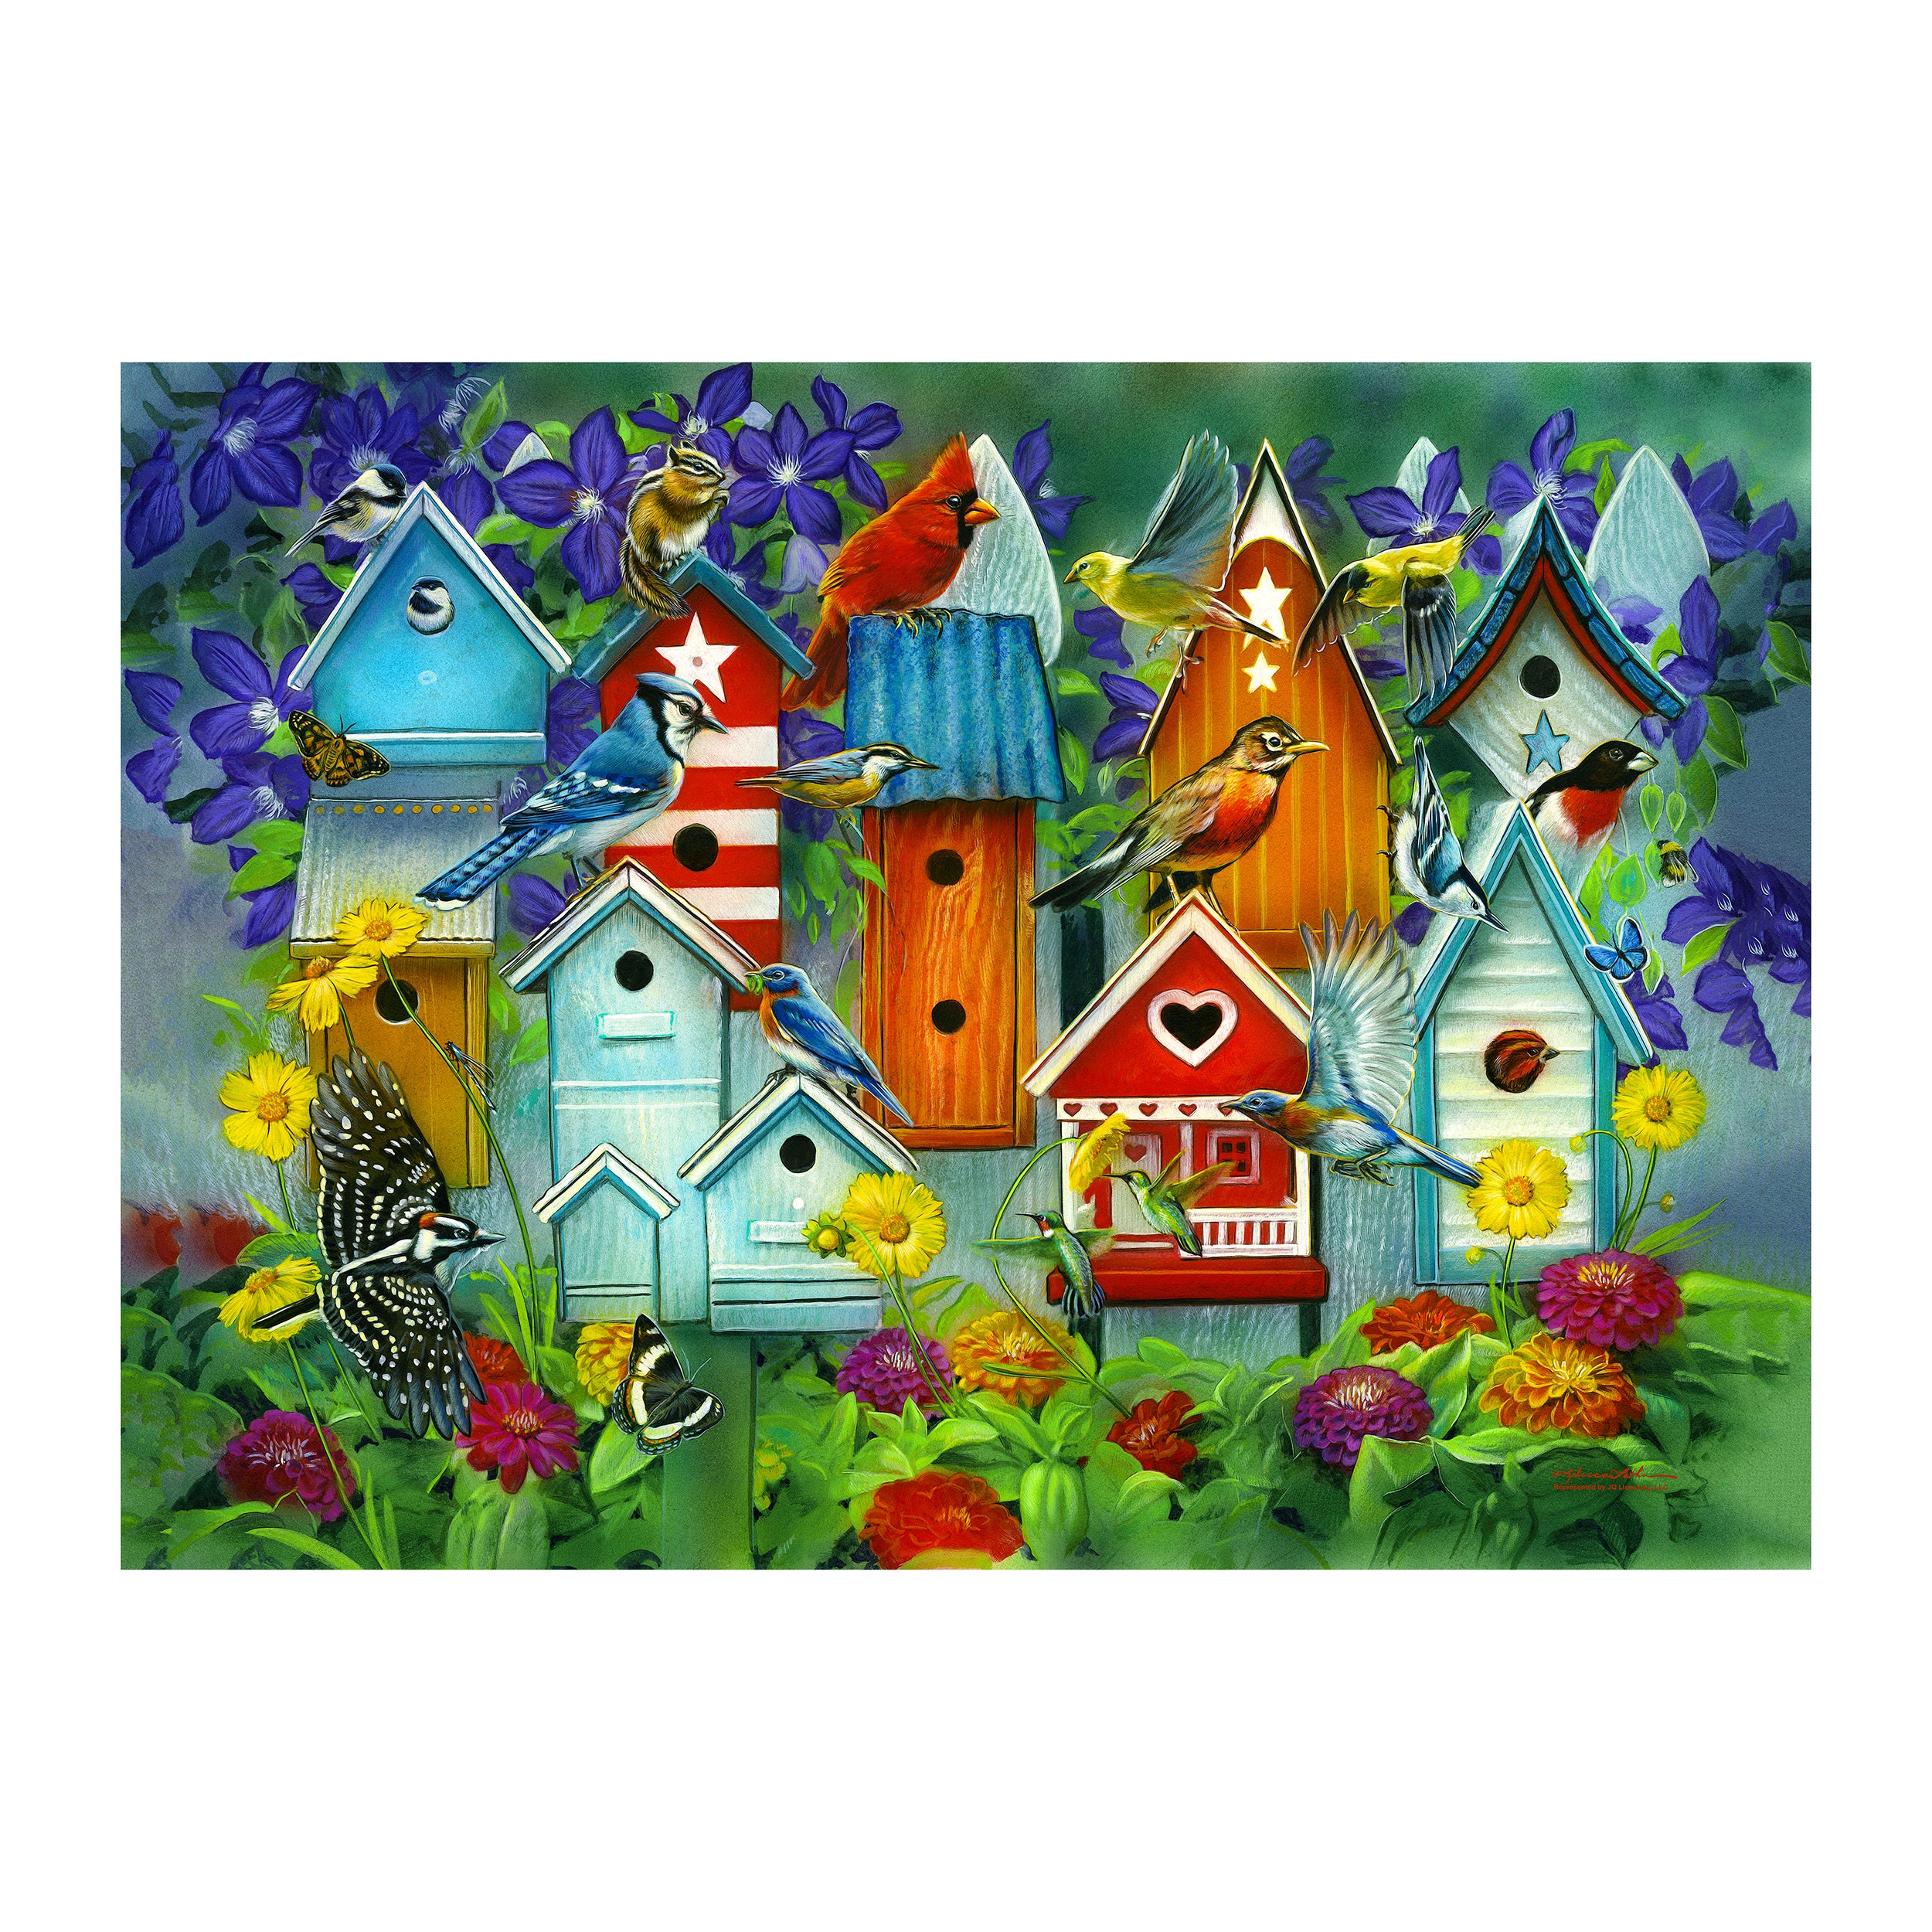 Rivers Edge Products 1000 Piece Puzzle, Jigsaw Puzzle in Tin for Adults, Teenagers, and Kids, Flower and Bird Puzzle, 28 by 20 Inches, Birdhouse